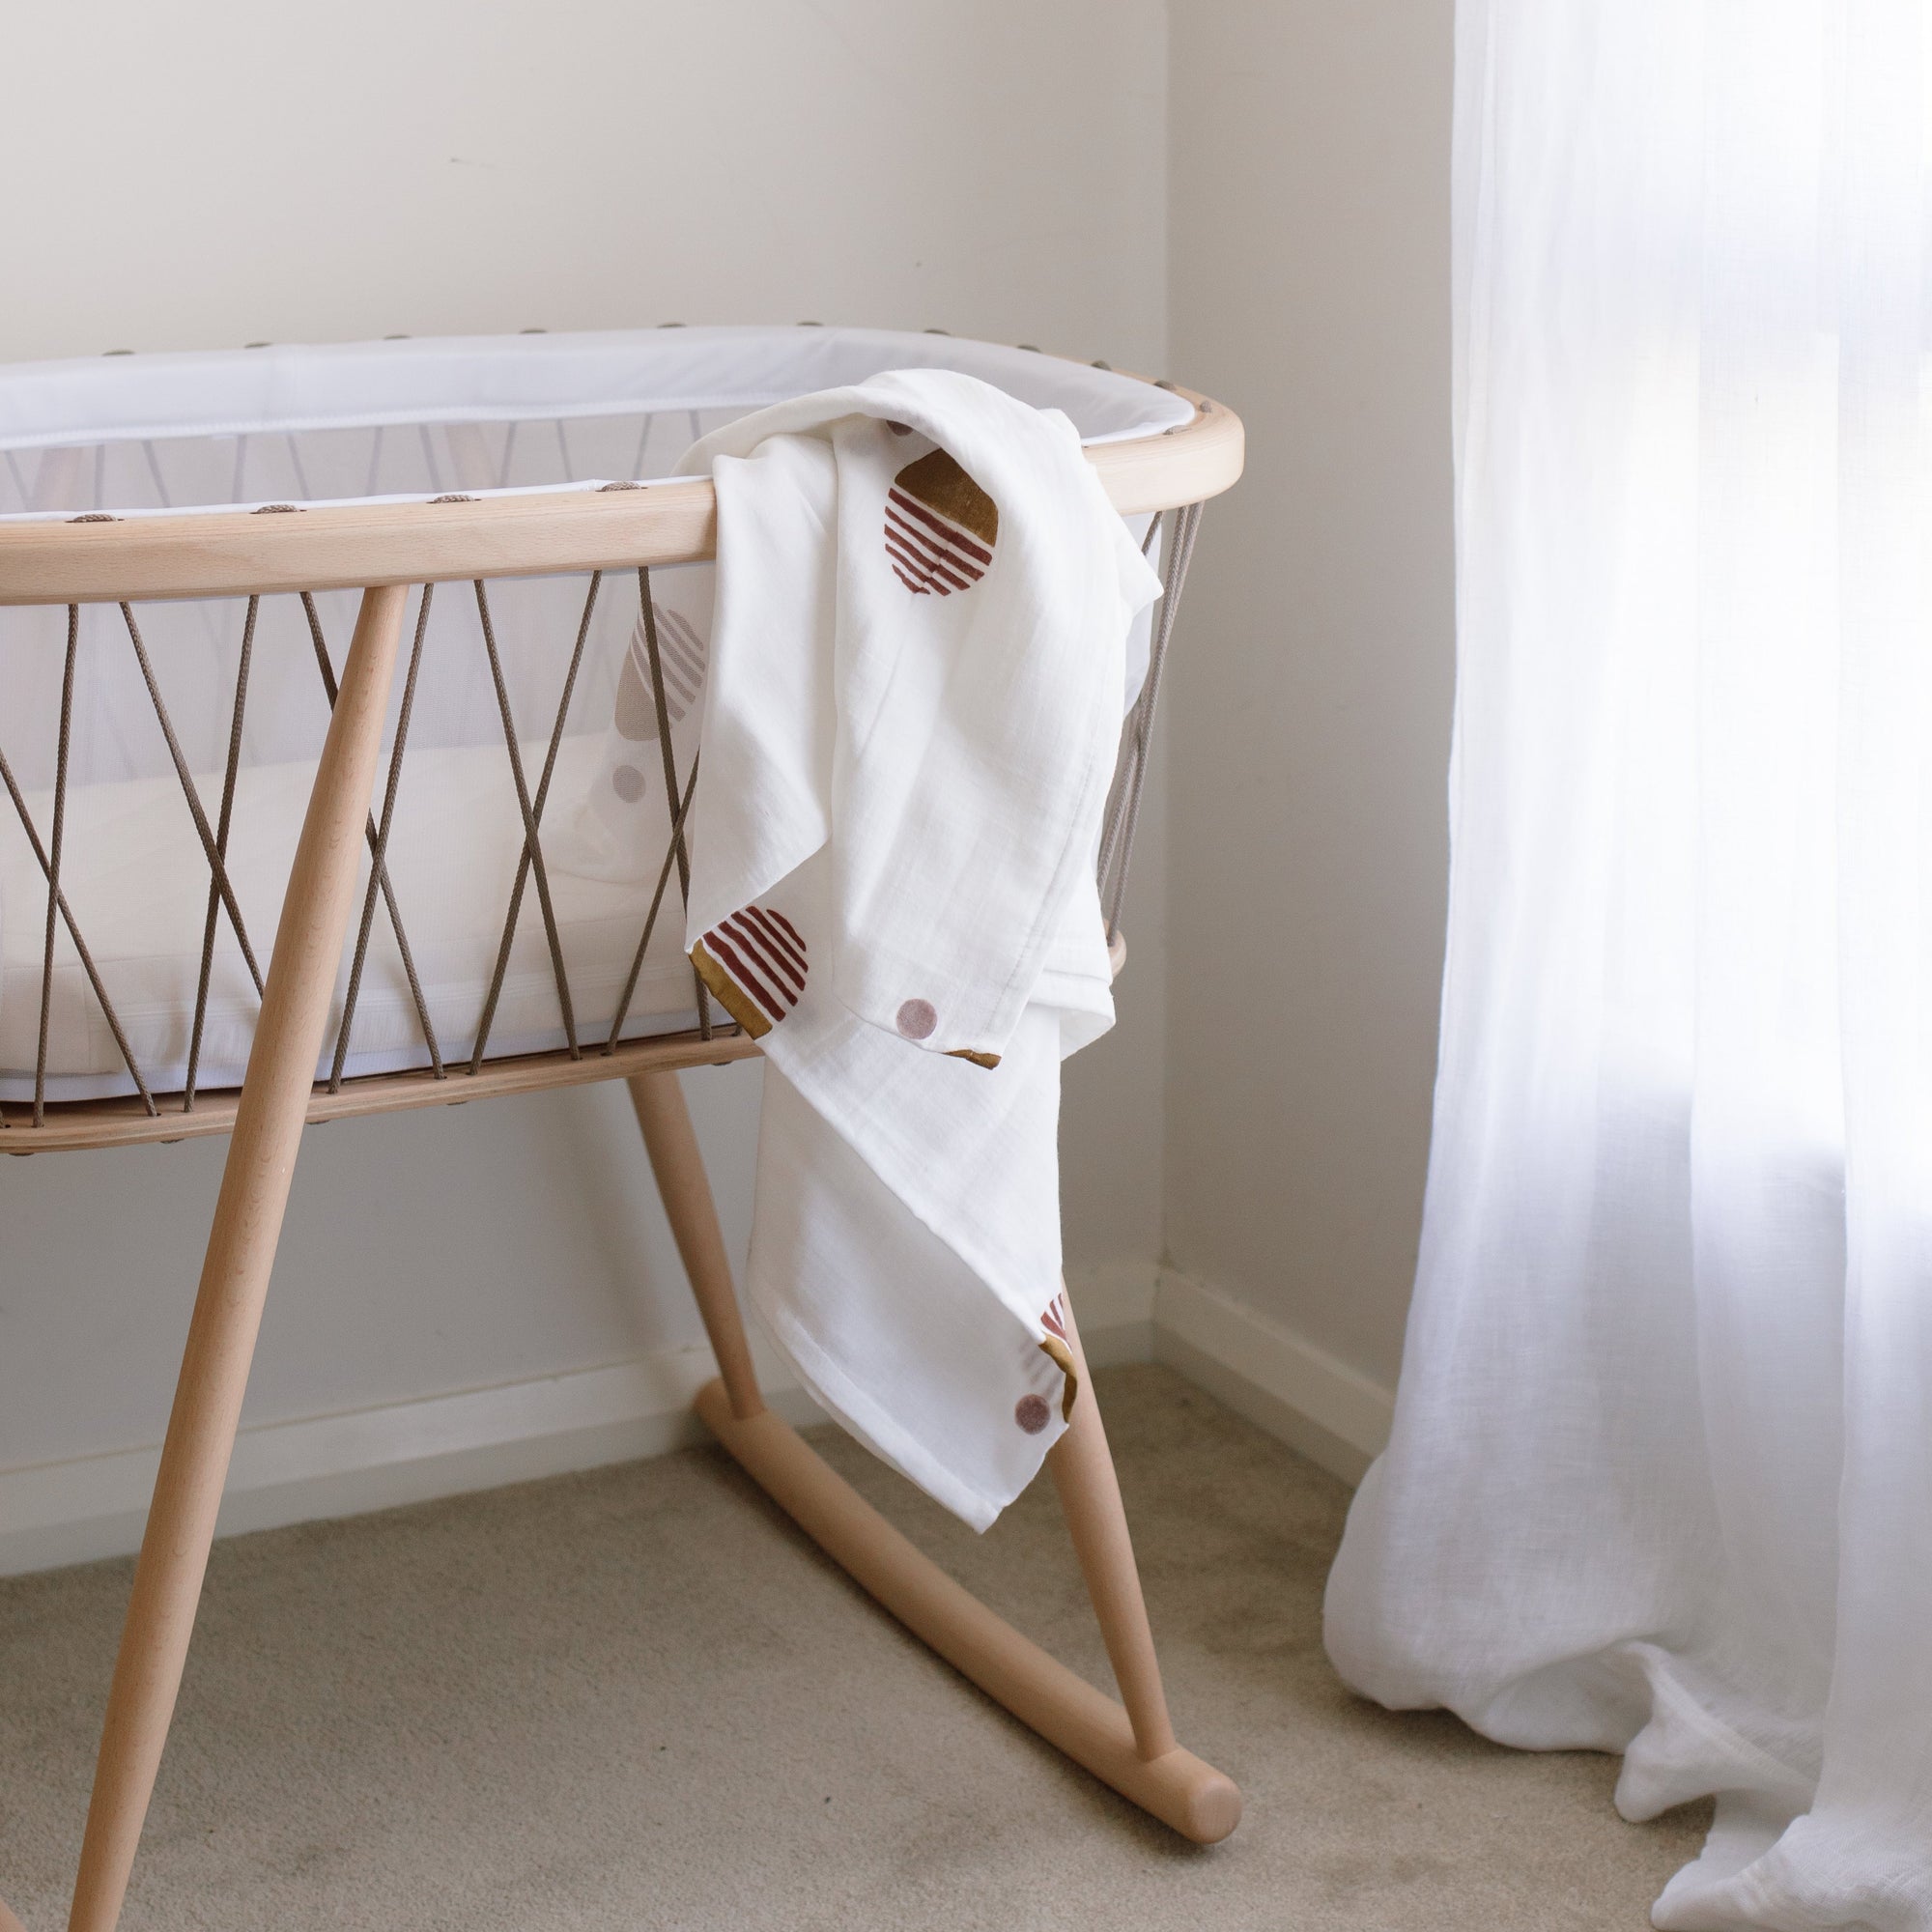 A Charlie Crane KUMI bassinet in Hazelnut in a room draped with a blanket.